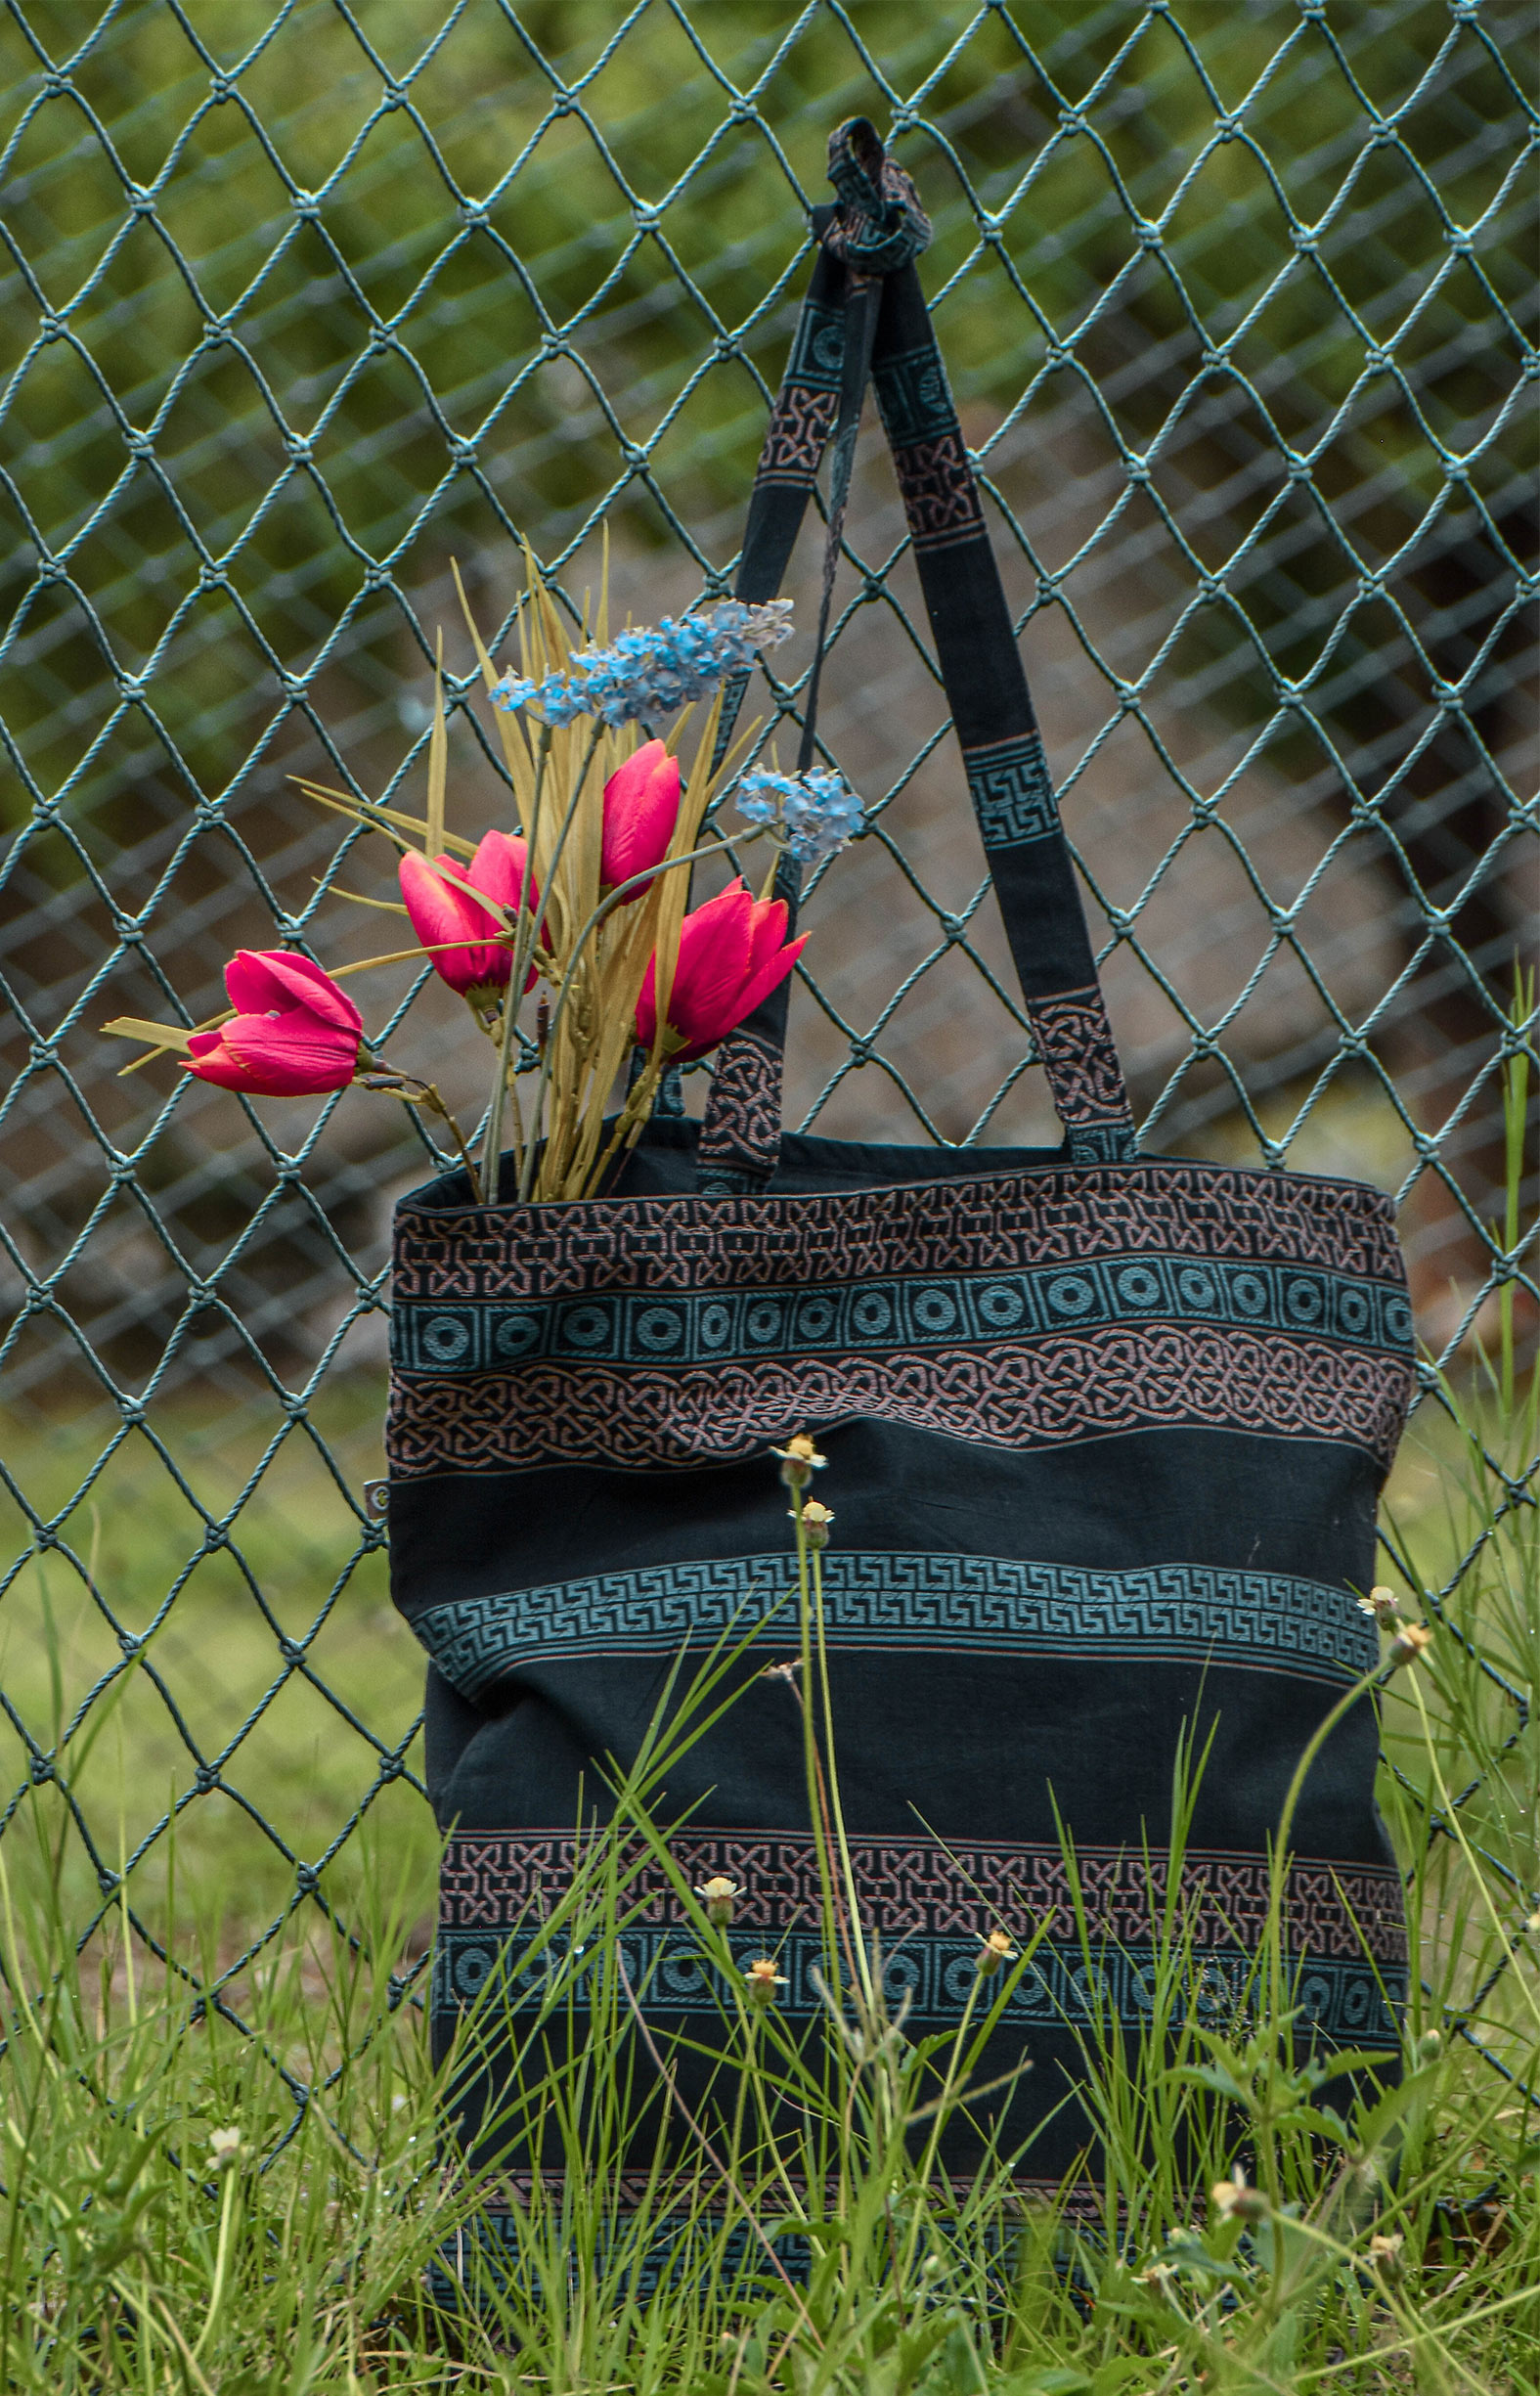 Black,blue and brown Handwoven Organic Cotton Tote Bag  